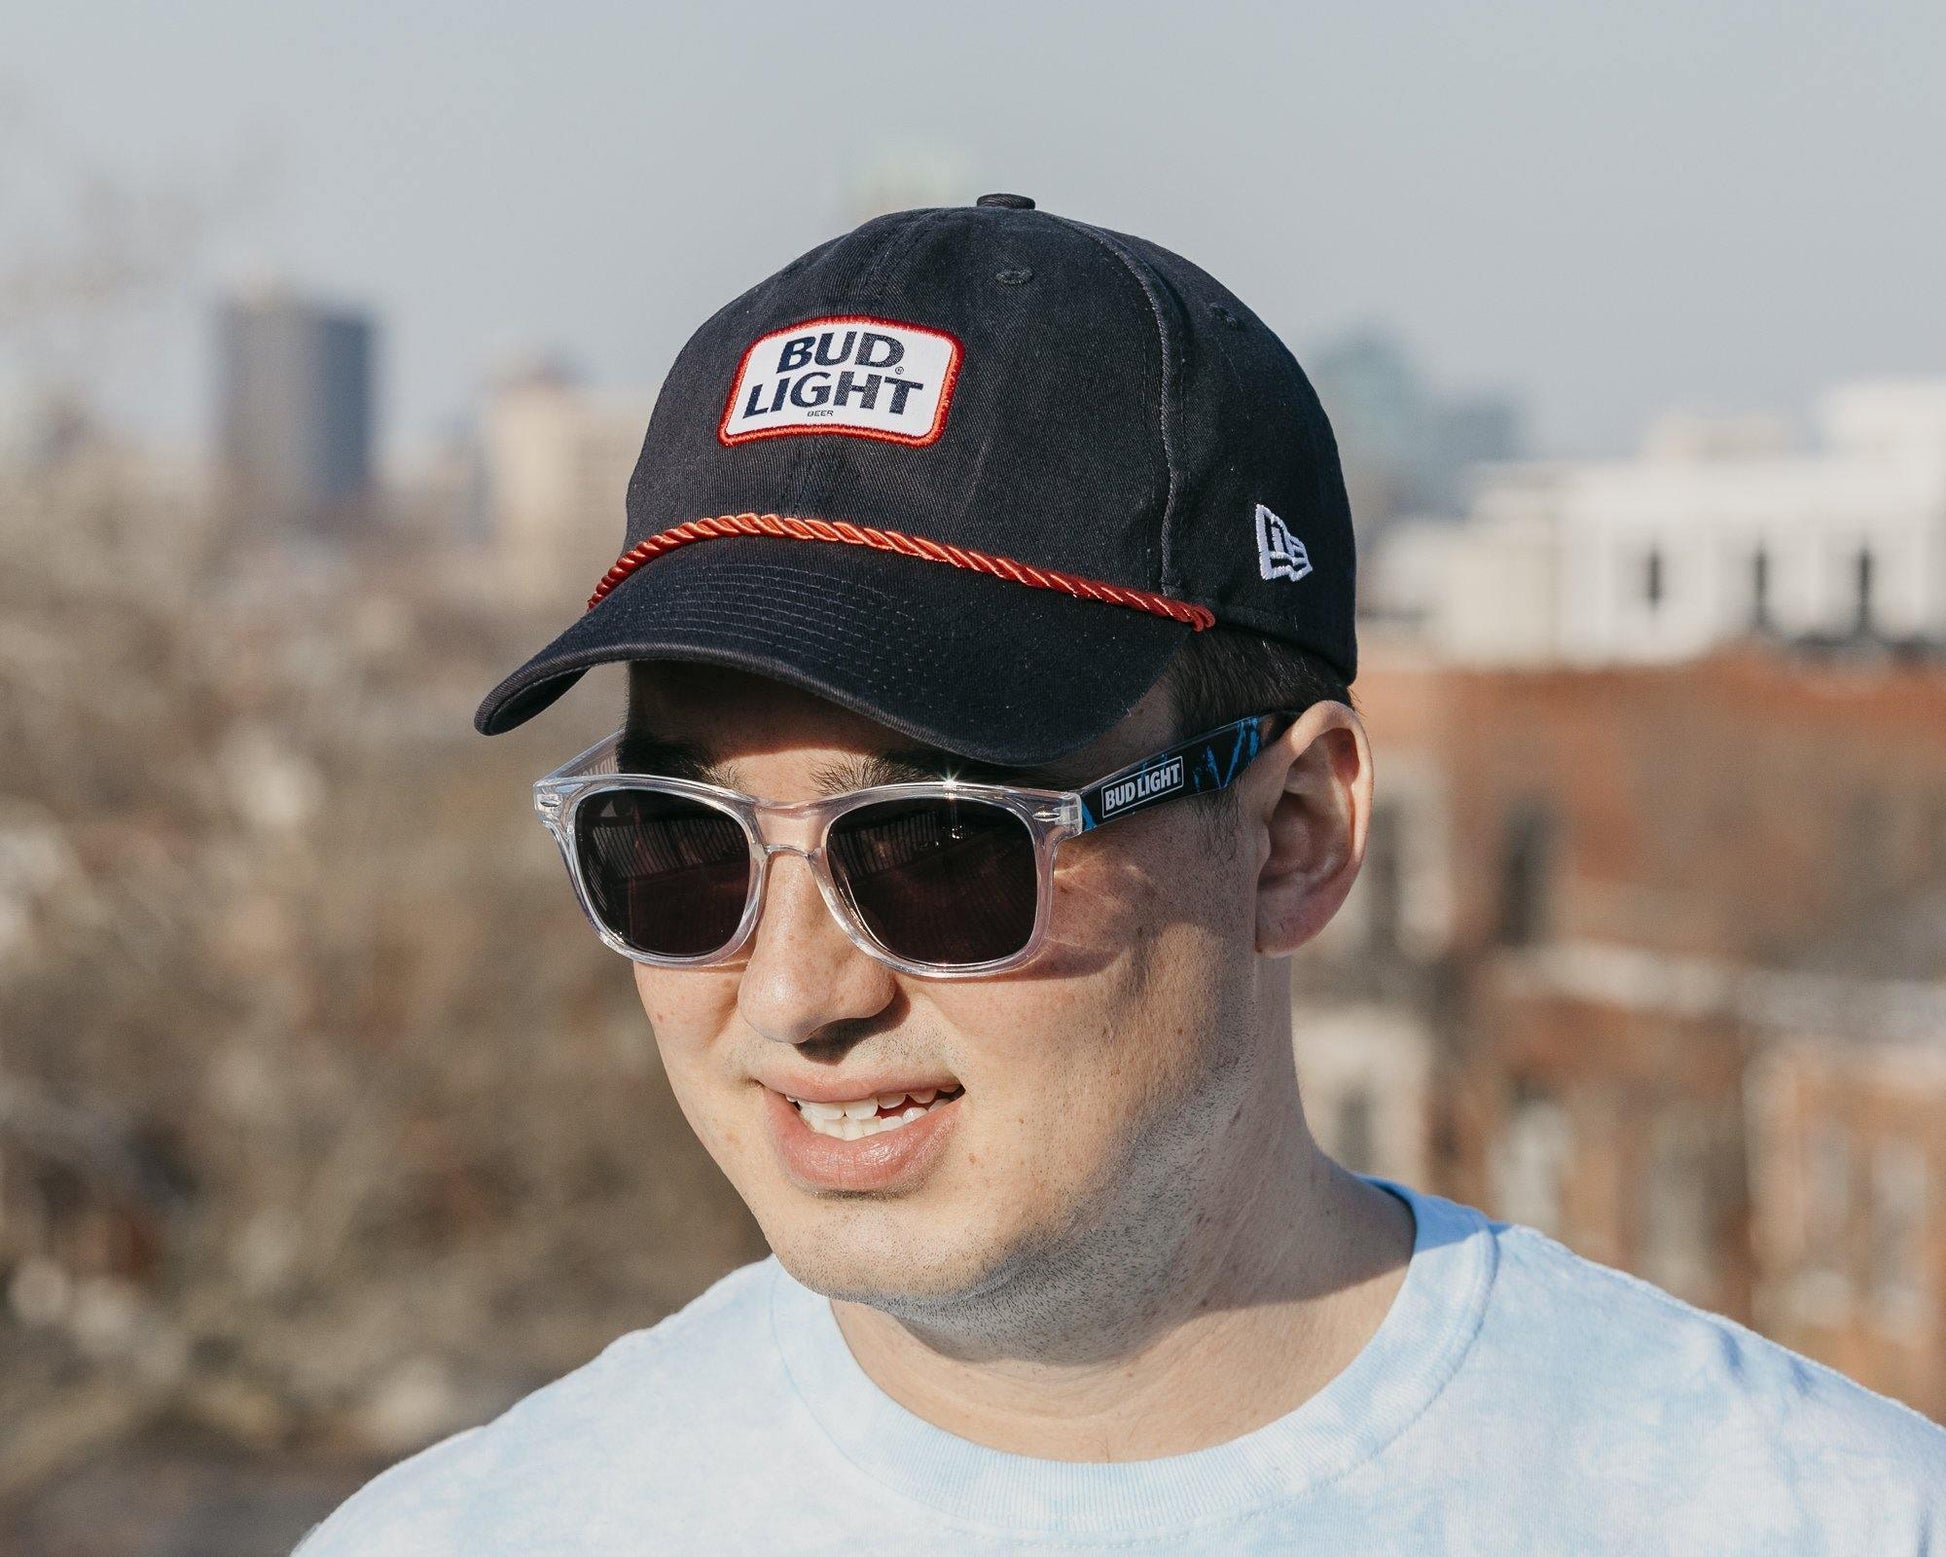 man wearing navy new era adjustable bud light hat with a red rope across the brim of the hat